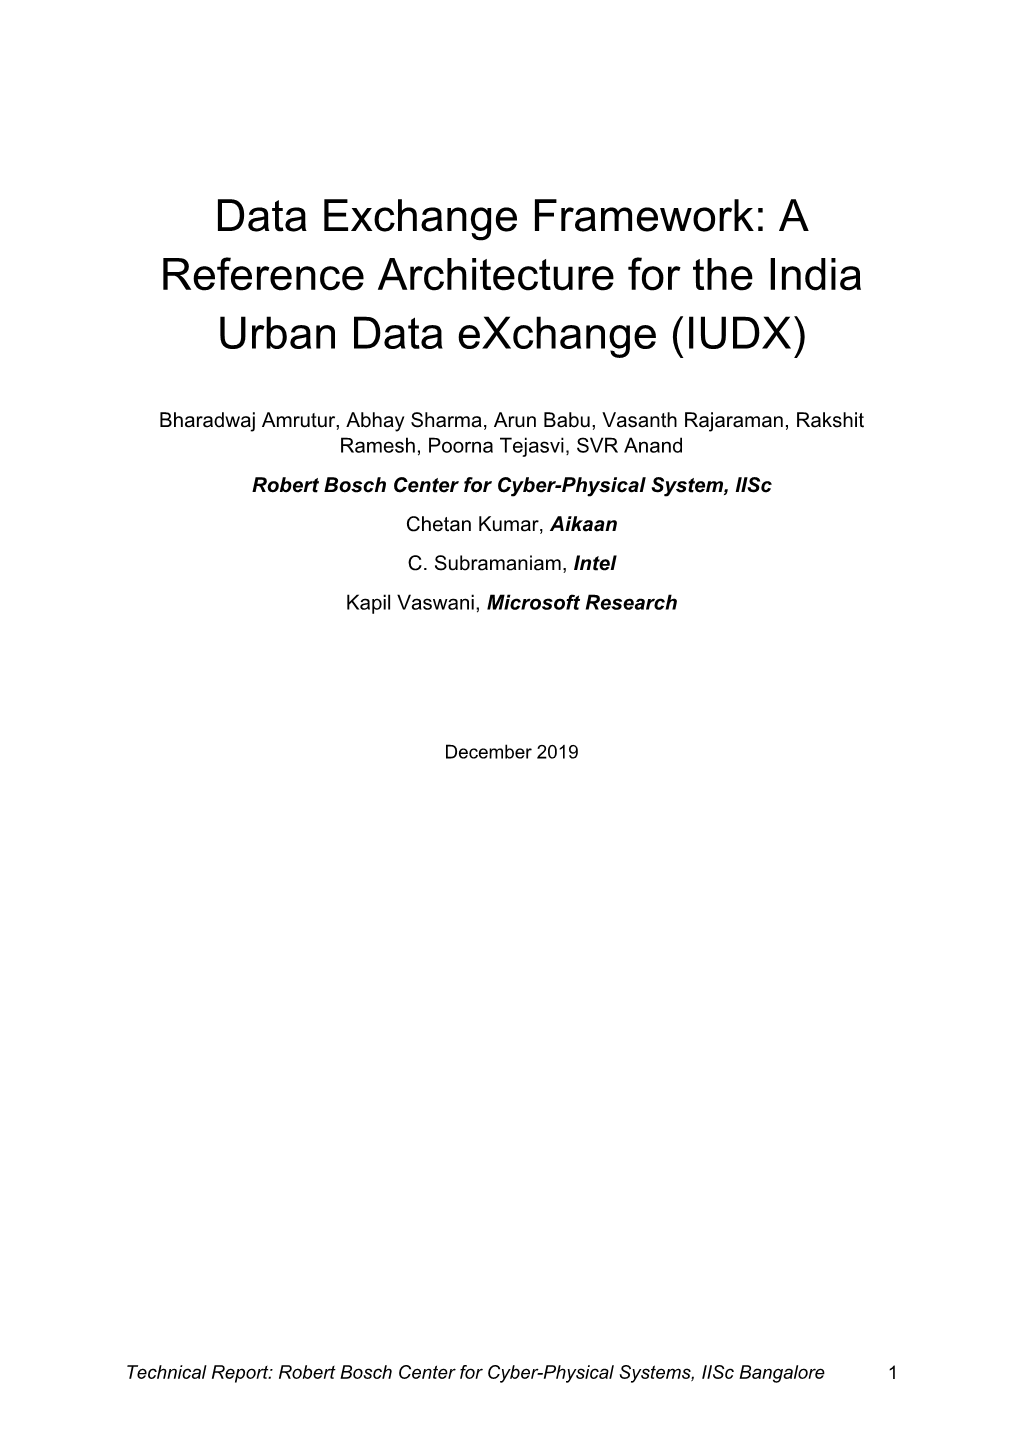 A Reference Architecture for the India Urban Data Exchange (IUDX)